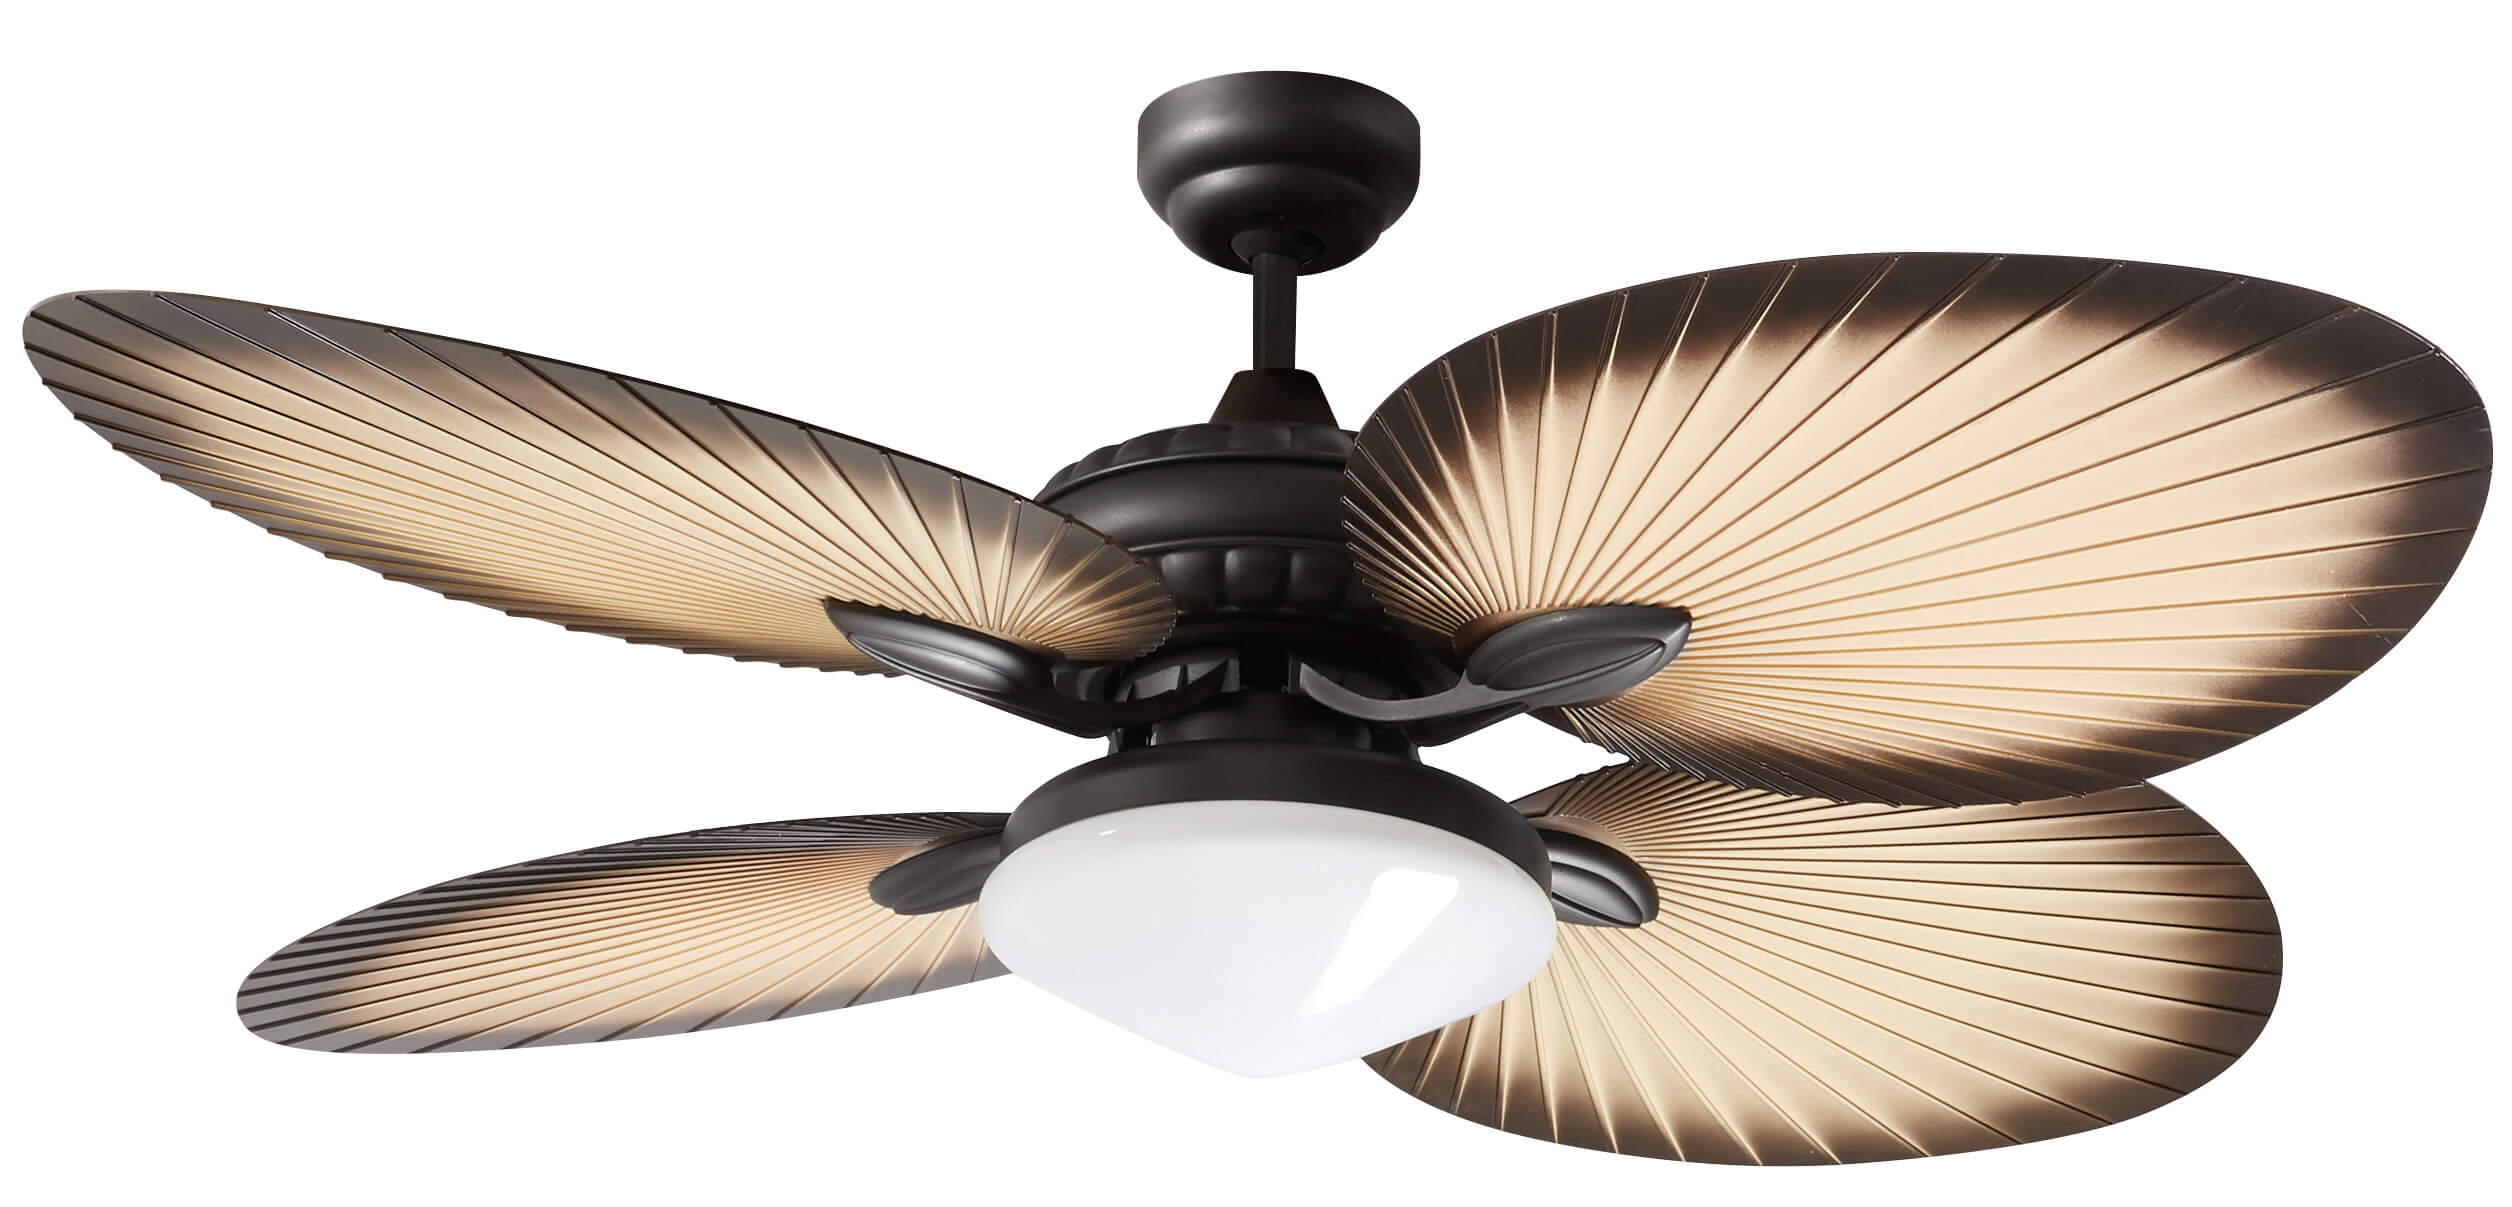 Outdoor Ceiling Fan Oasis 132cm 52 With Light And Remote Home Commercial Heaters Ventilation Ceiling Fans Uk